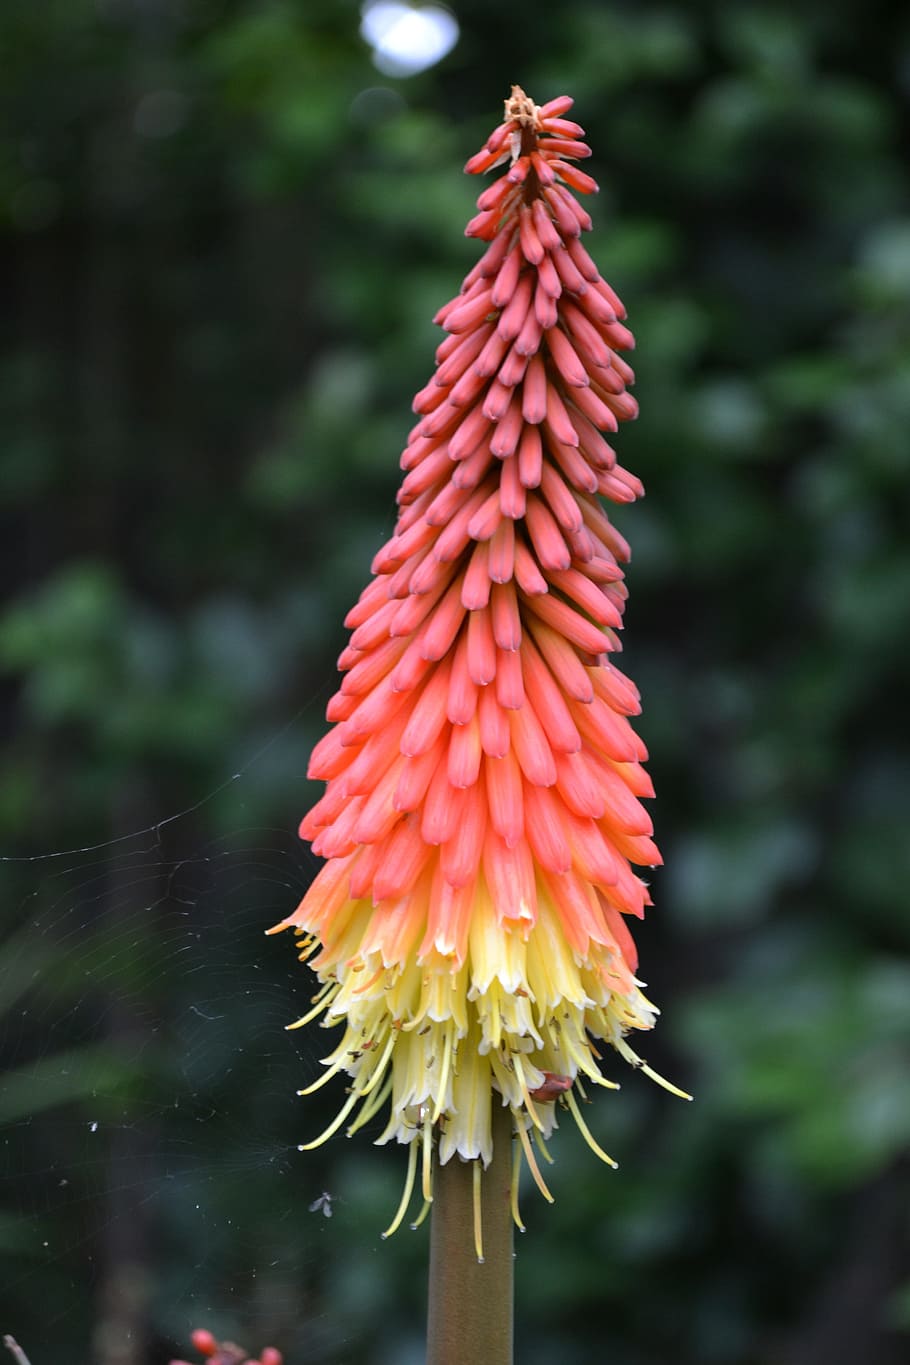 polka, kniphofia, red-hot polka, flower, torch lily, tritoma, knoffler, african lily, bloom, perennial